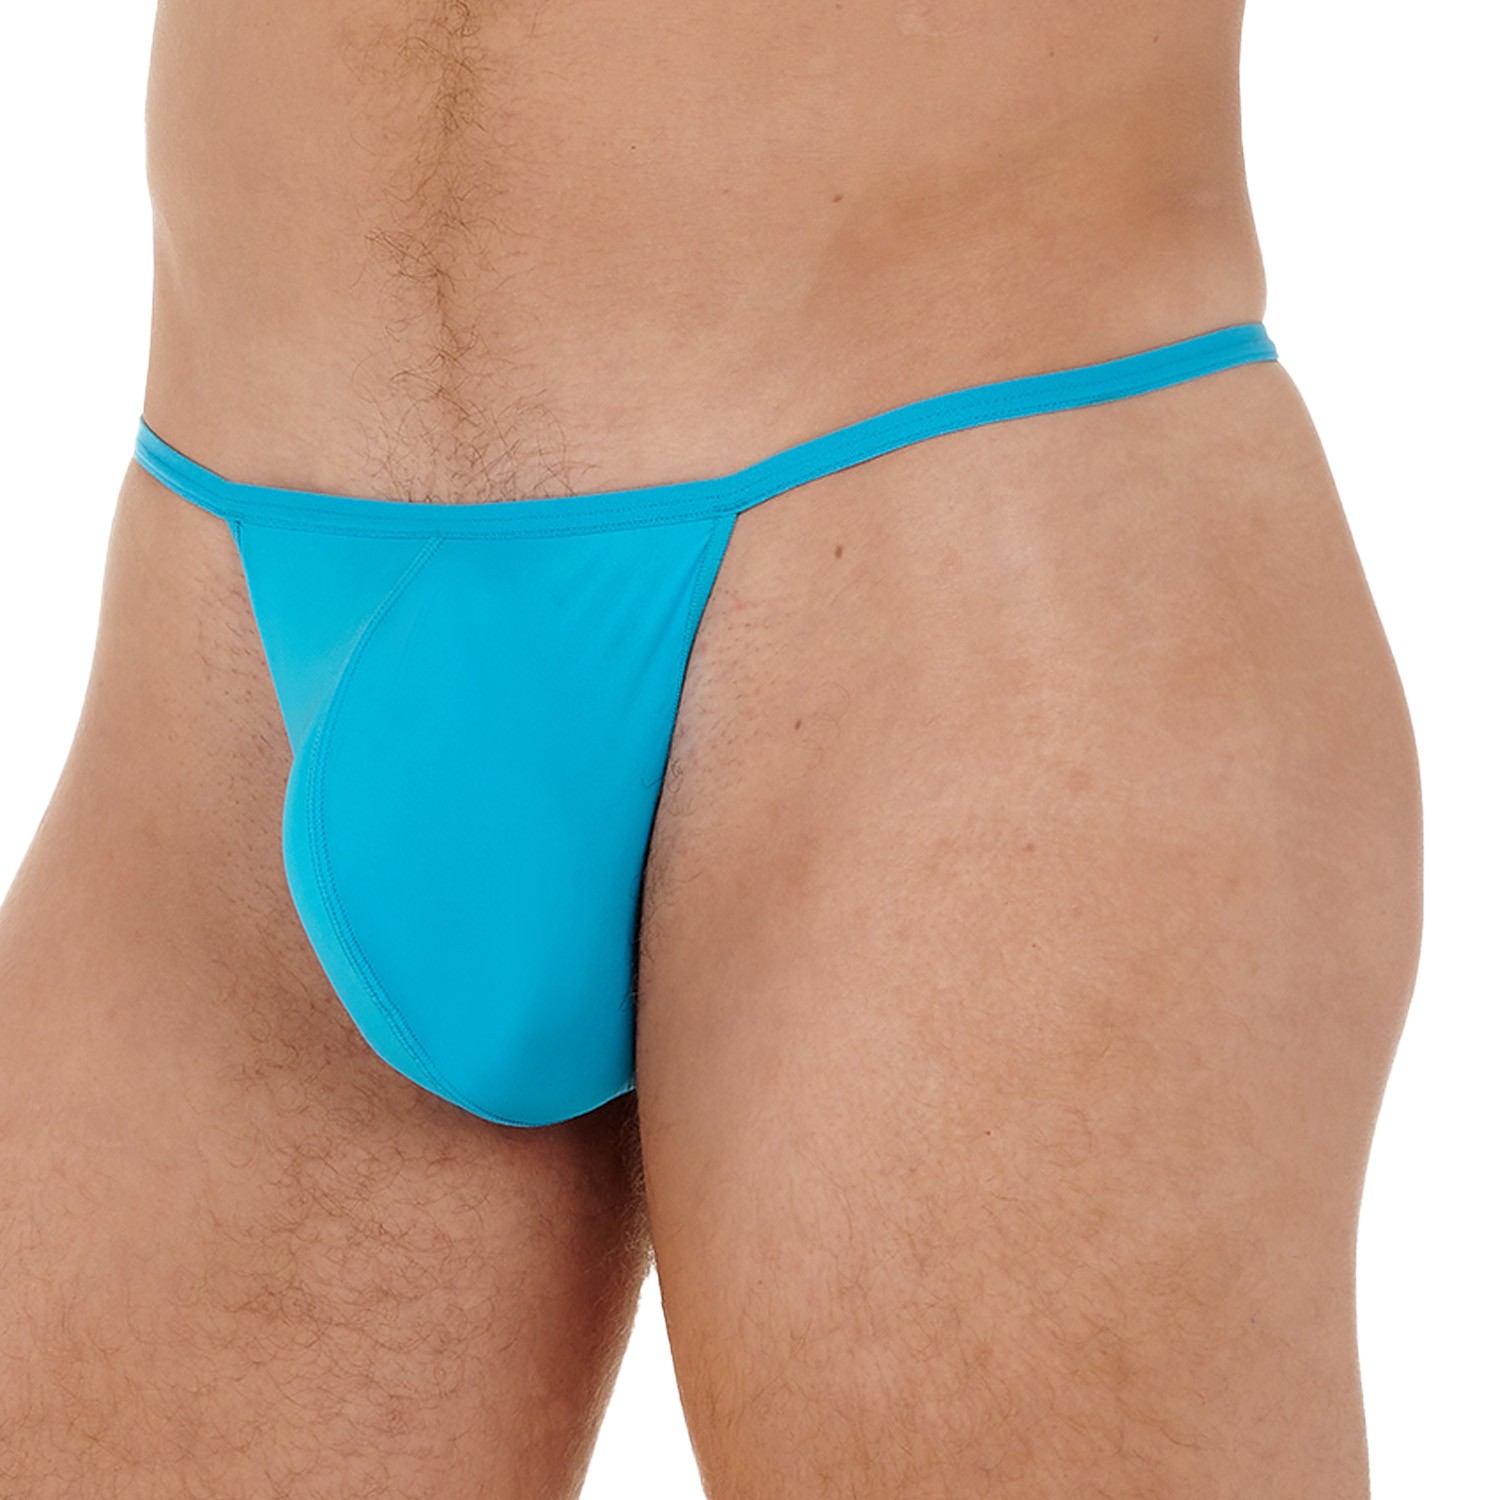 Hom Plume G-string In Pink